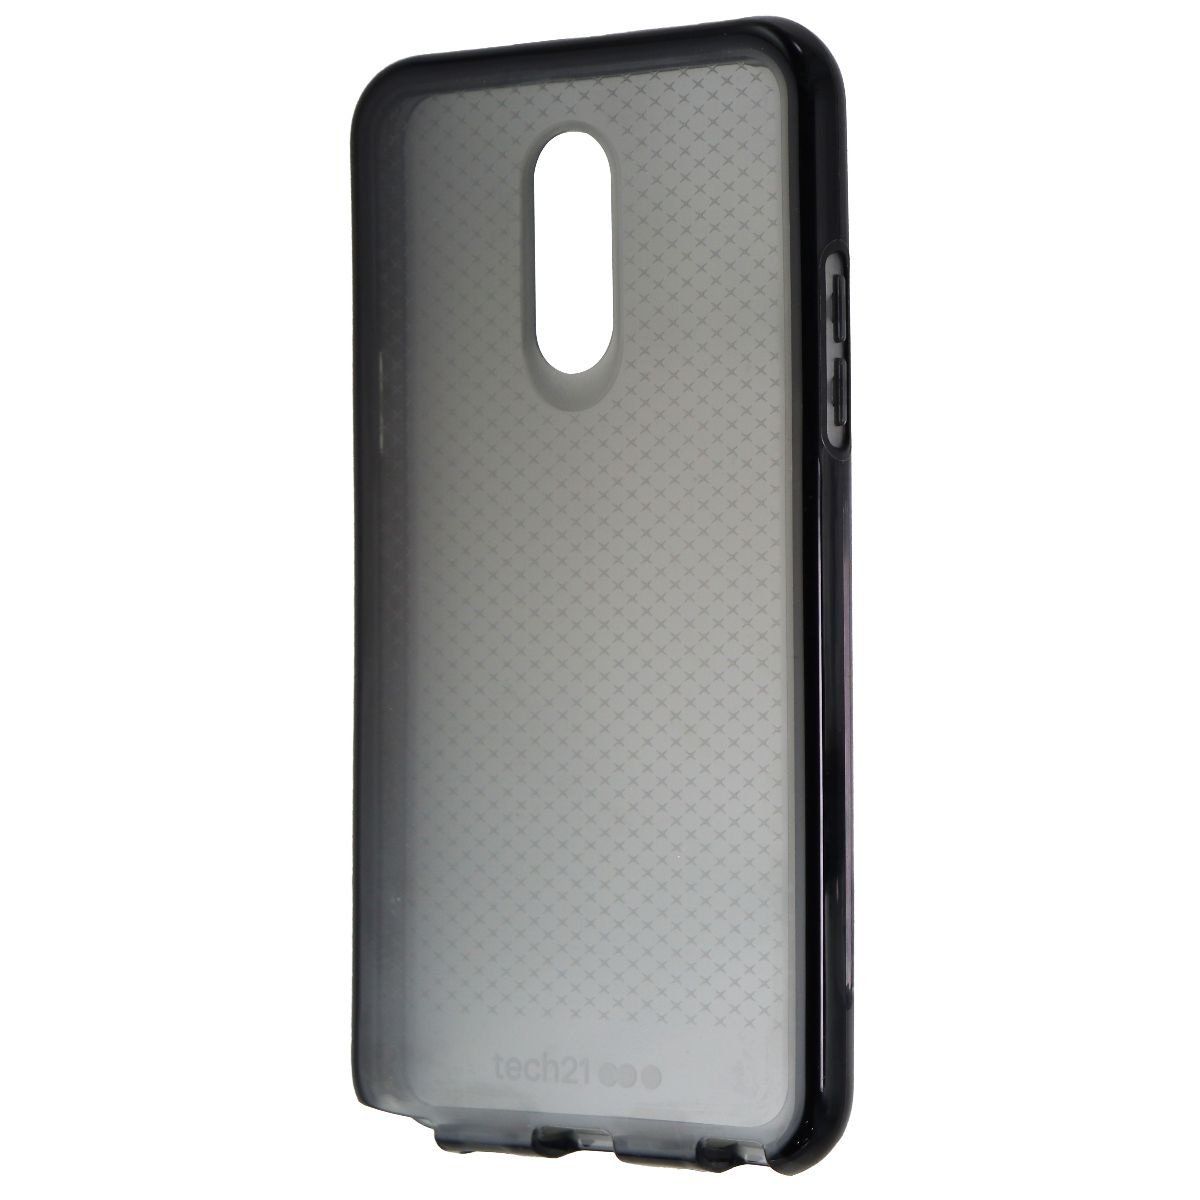 Black Case for LG Stylo 5 from Tech21